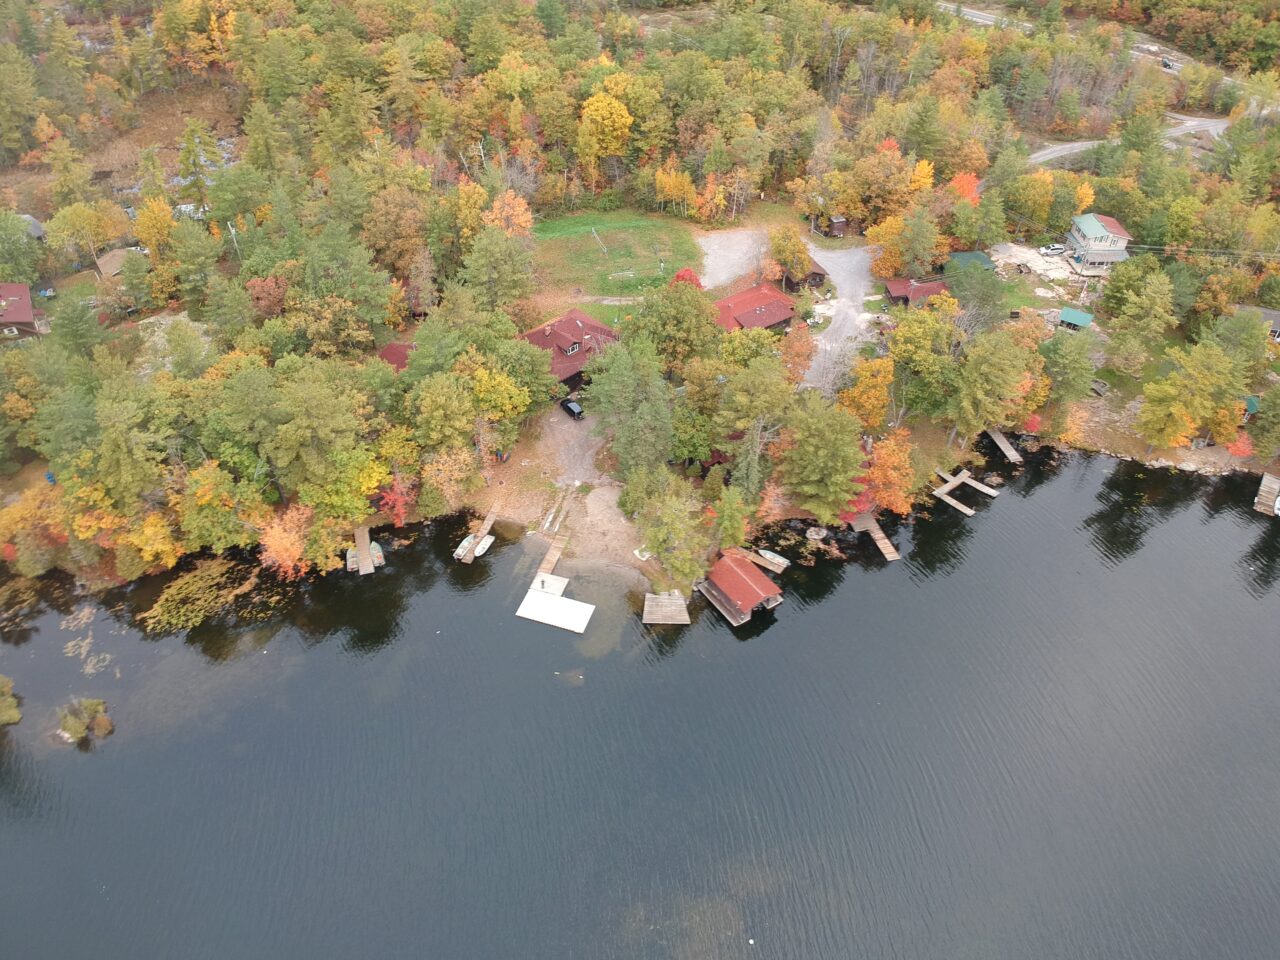 An aerial view of a cottage resort on a lake